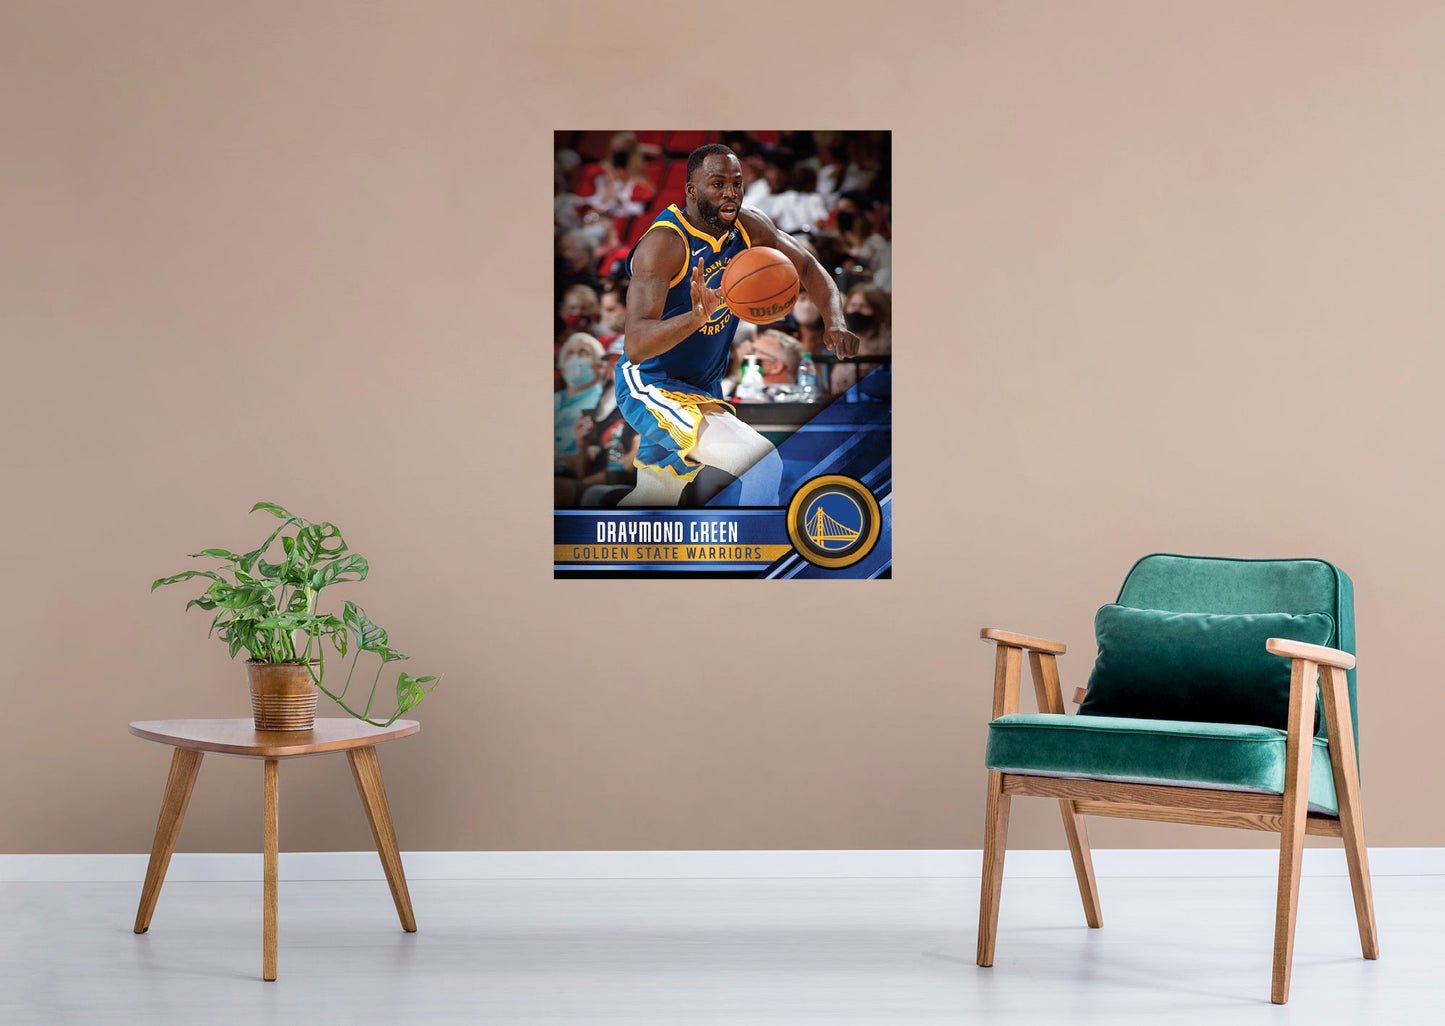 Golden State Warriors: Draymond Green Poster - Officially Licensed NBA Removable Adhesive Decal